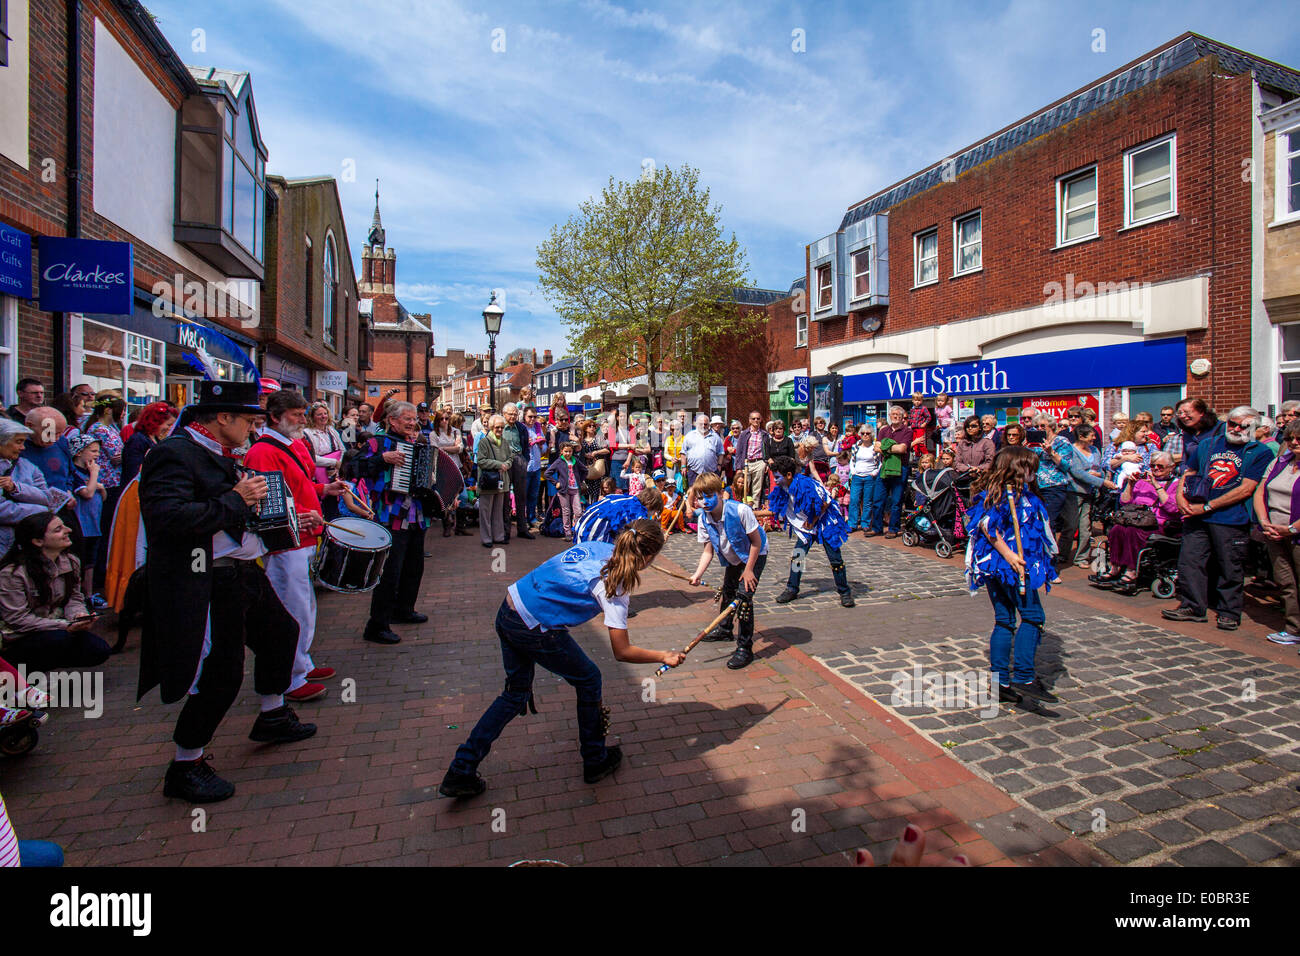 The Plumpton Black Brook Childrens Morris Dancers Perform In The Precinct, Lewes, Sussex, England (May Day 2014) Stock Photo